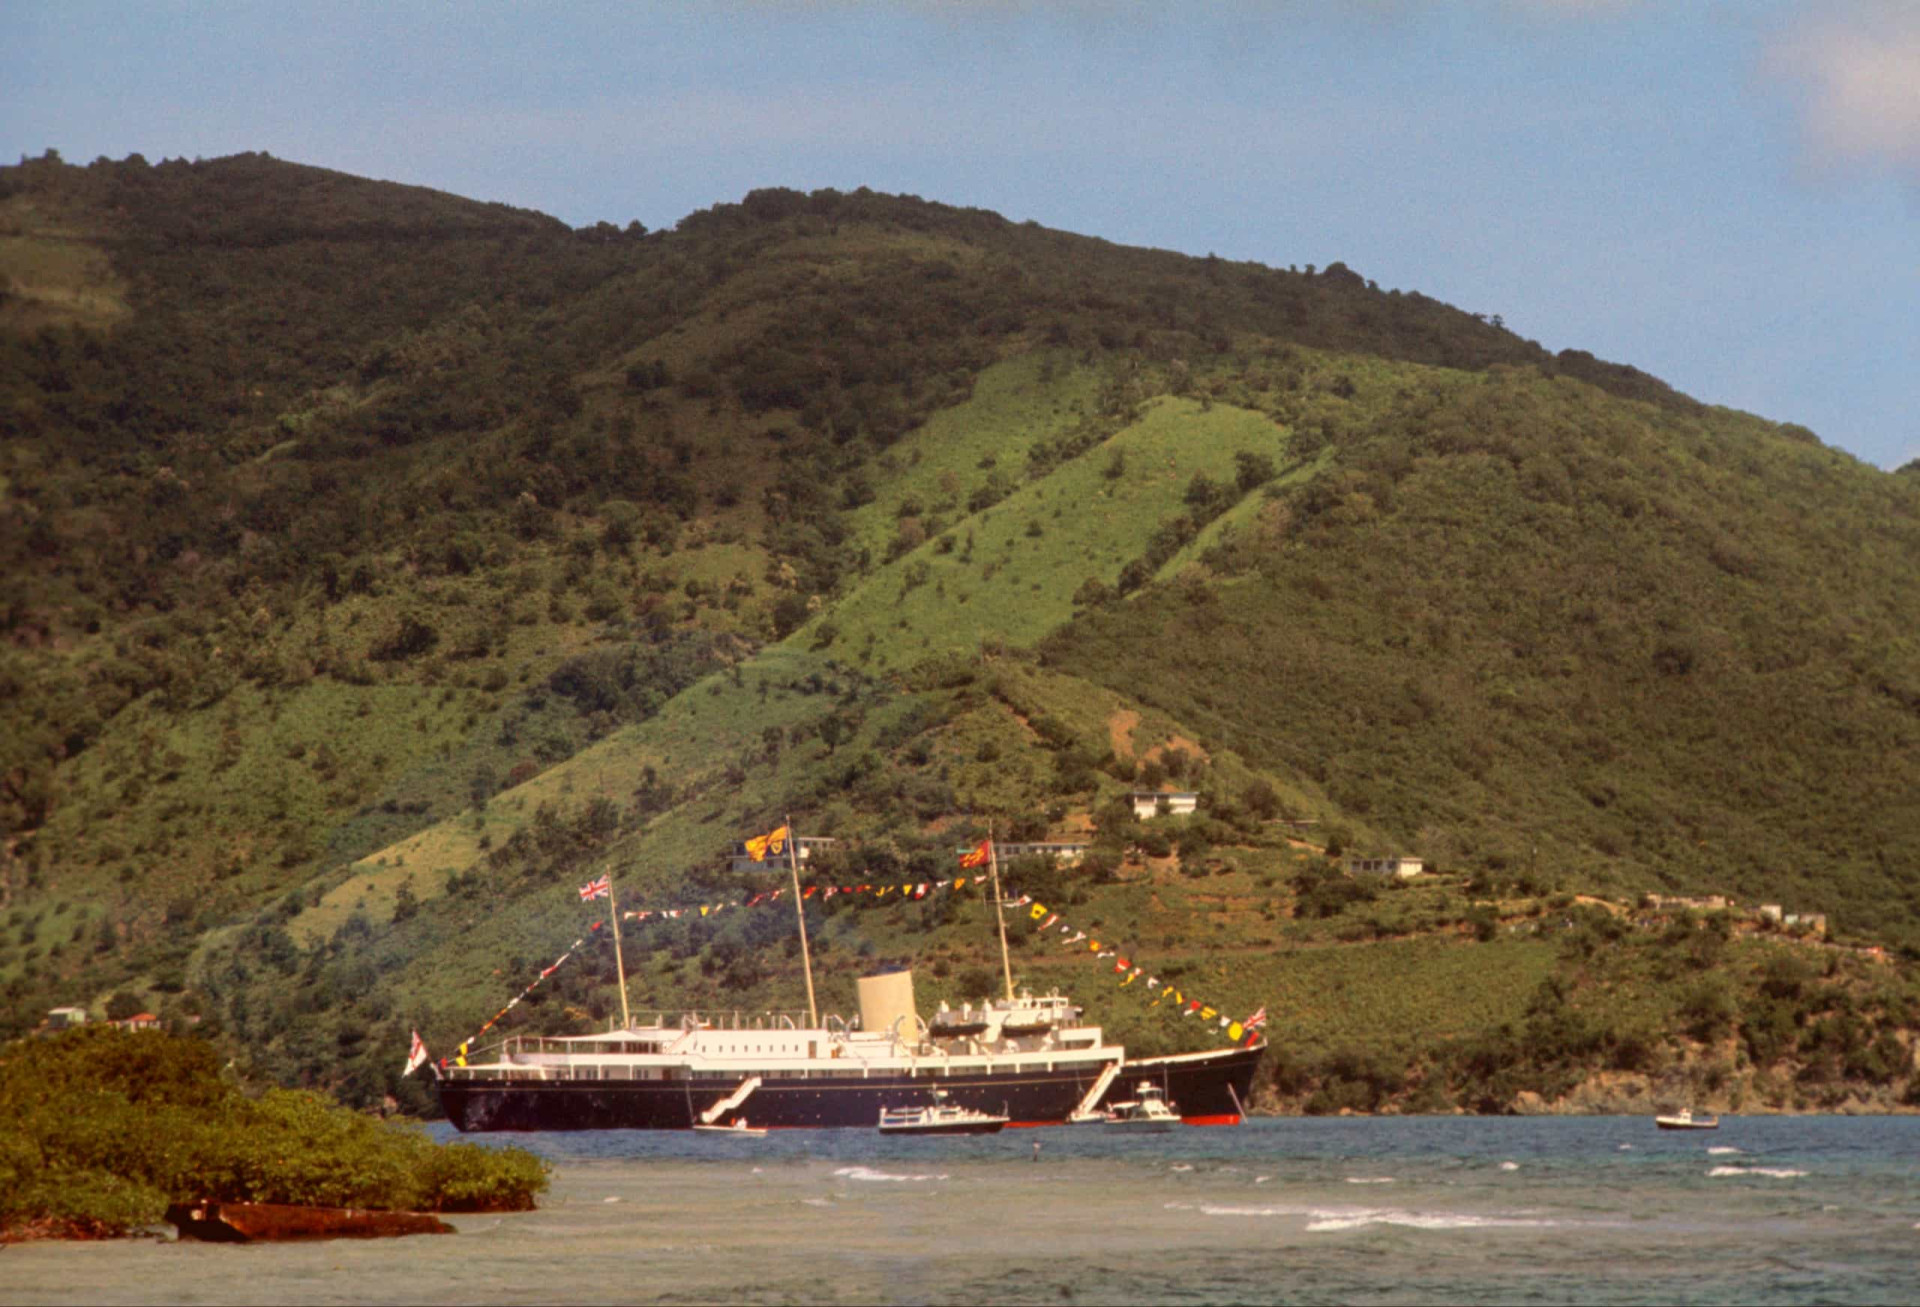 <p>In October 1977, the Royal Yacht <em>Britannia</em> anchored off Road Harbor during Queen Elizabeth II's visit to the British Virgin Islands as part of her Silver Jubilee tour of the Caribbean.</p><p>You may also like:<a href="https://www.starsinsider.com/n/350323?utm_source=msn.com&utm_medium=display&utm_campaign=referral_description&utm_content=474709v1en-us"> Celebs reveal the stories behind their stage names</a></p>